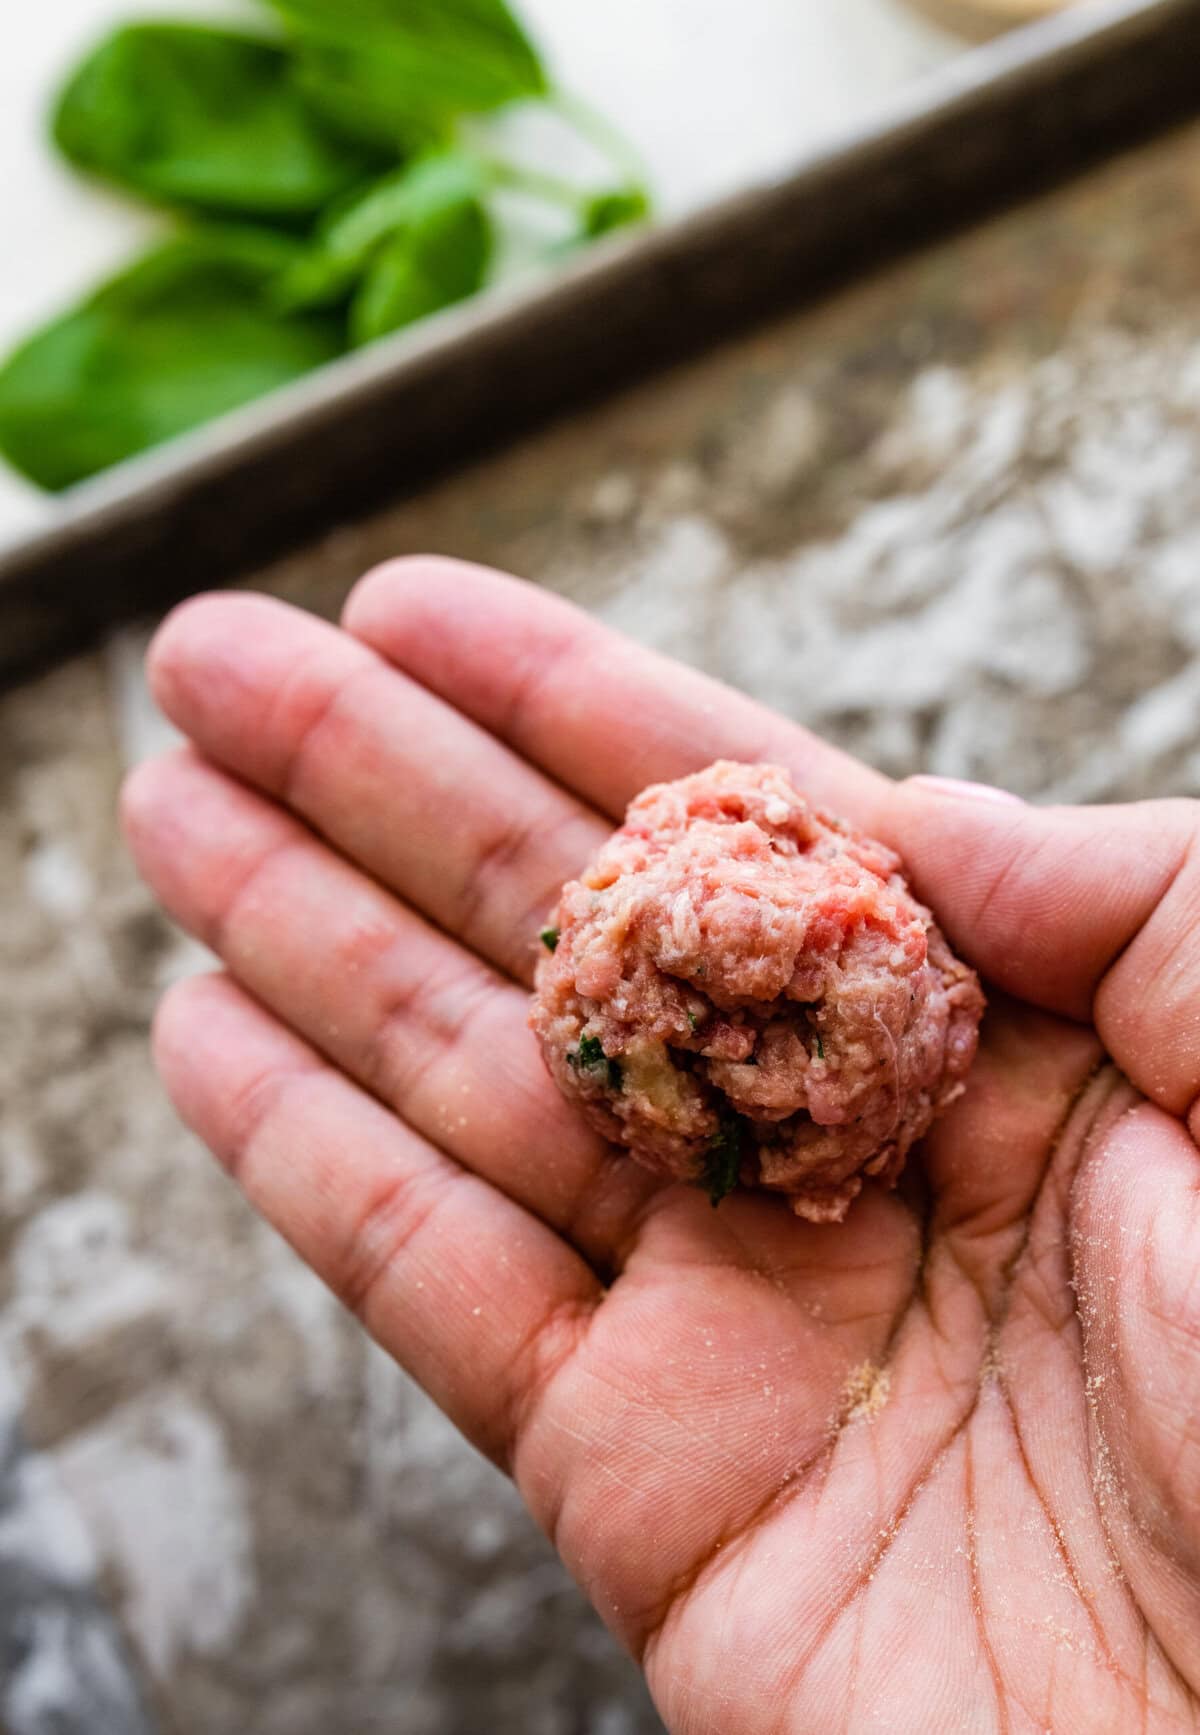 How to make Polpette (Traditional Italian Meatballs) Instructions: shape the meatballs.